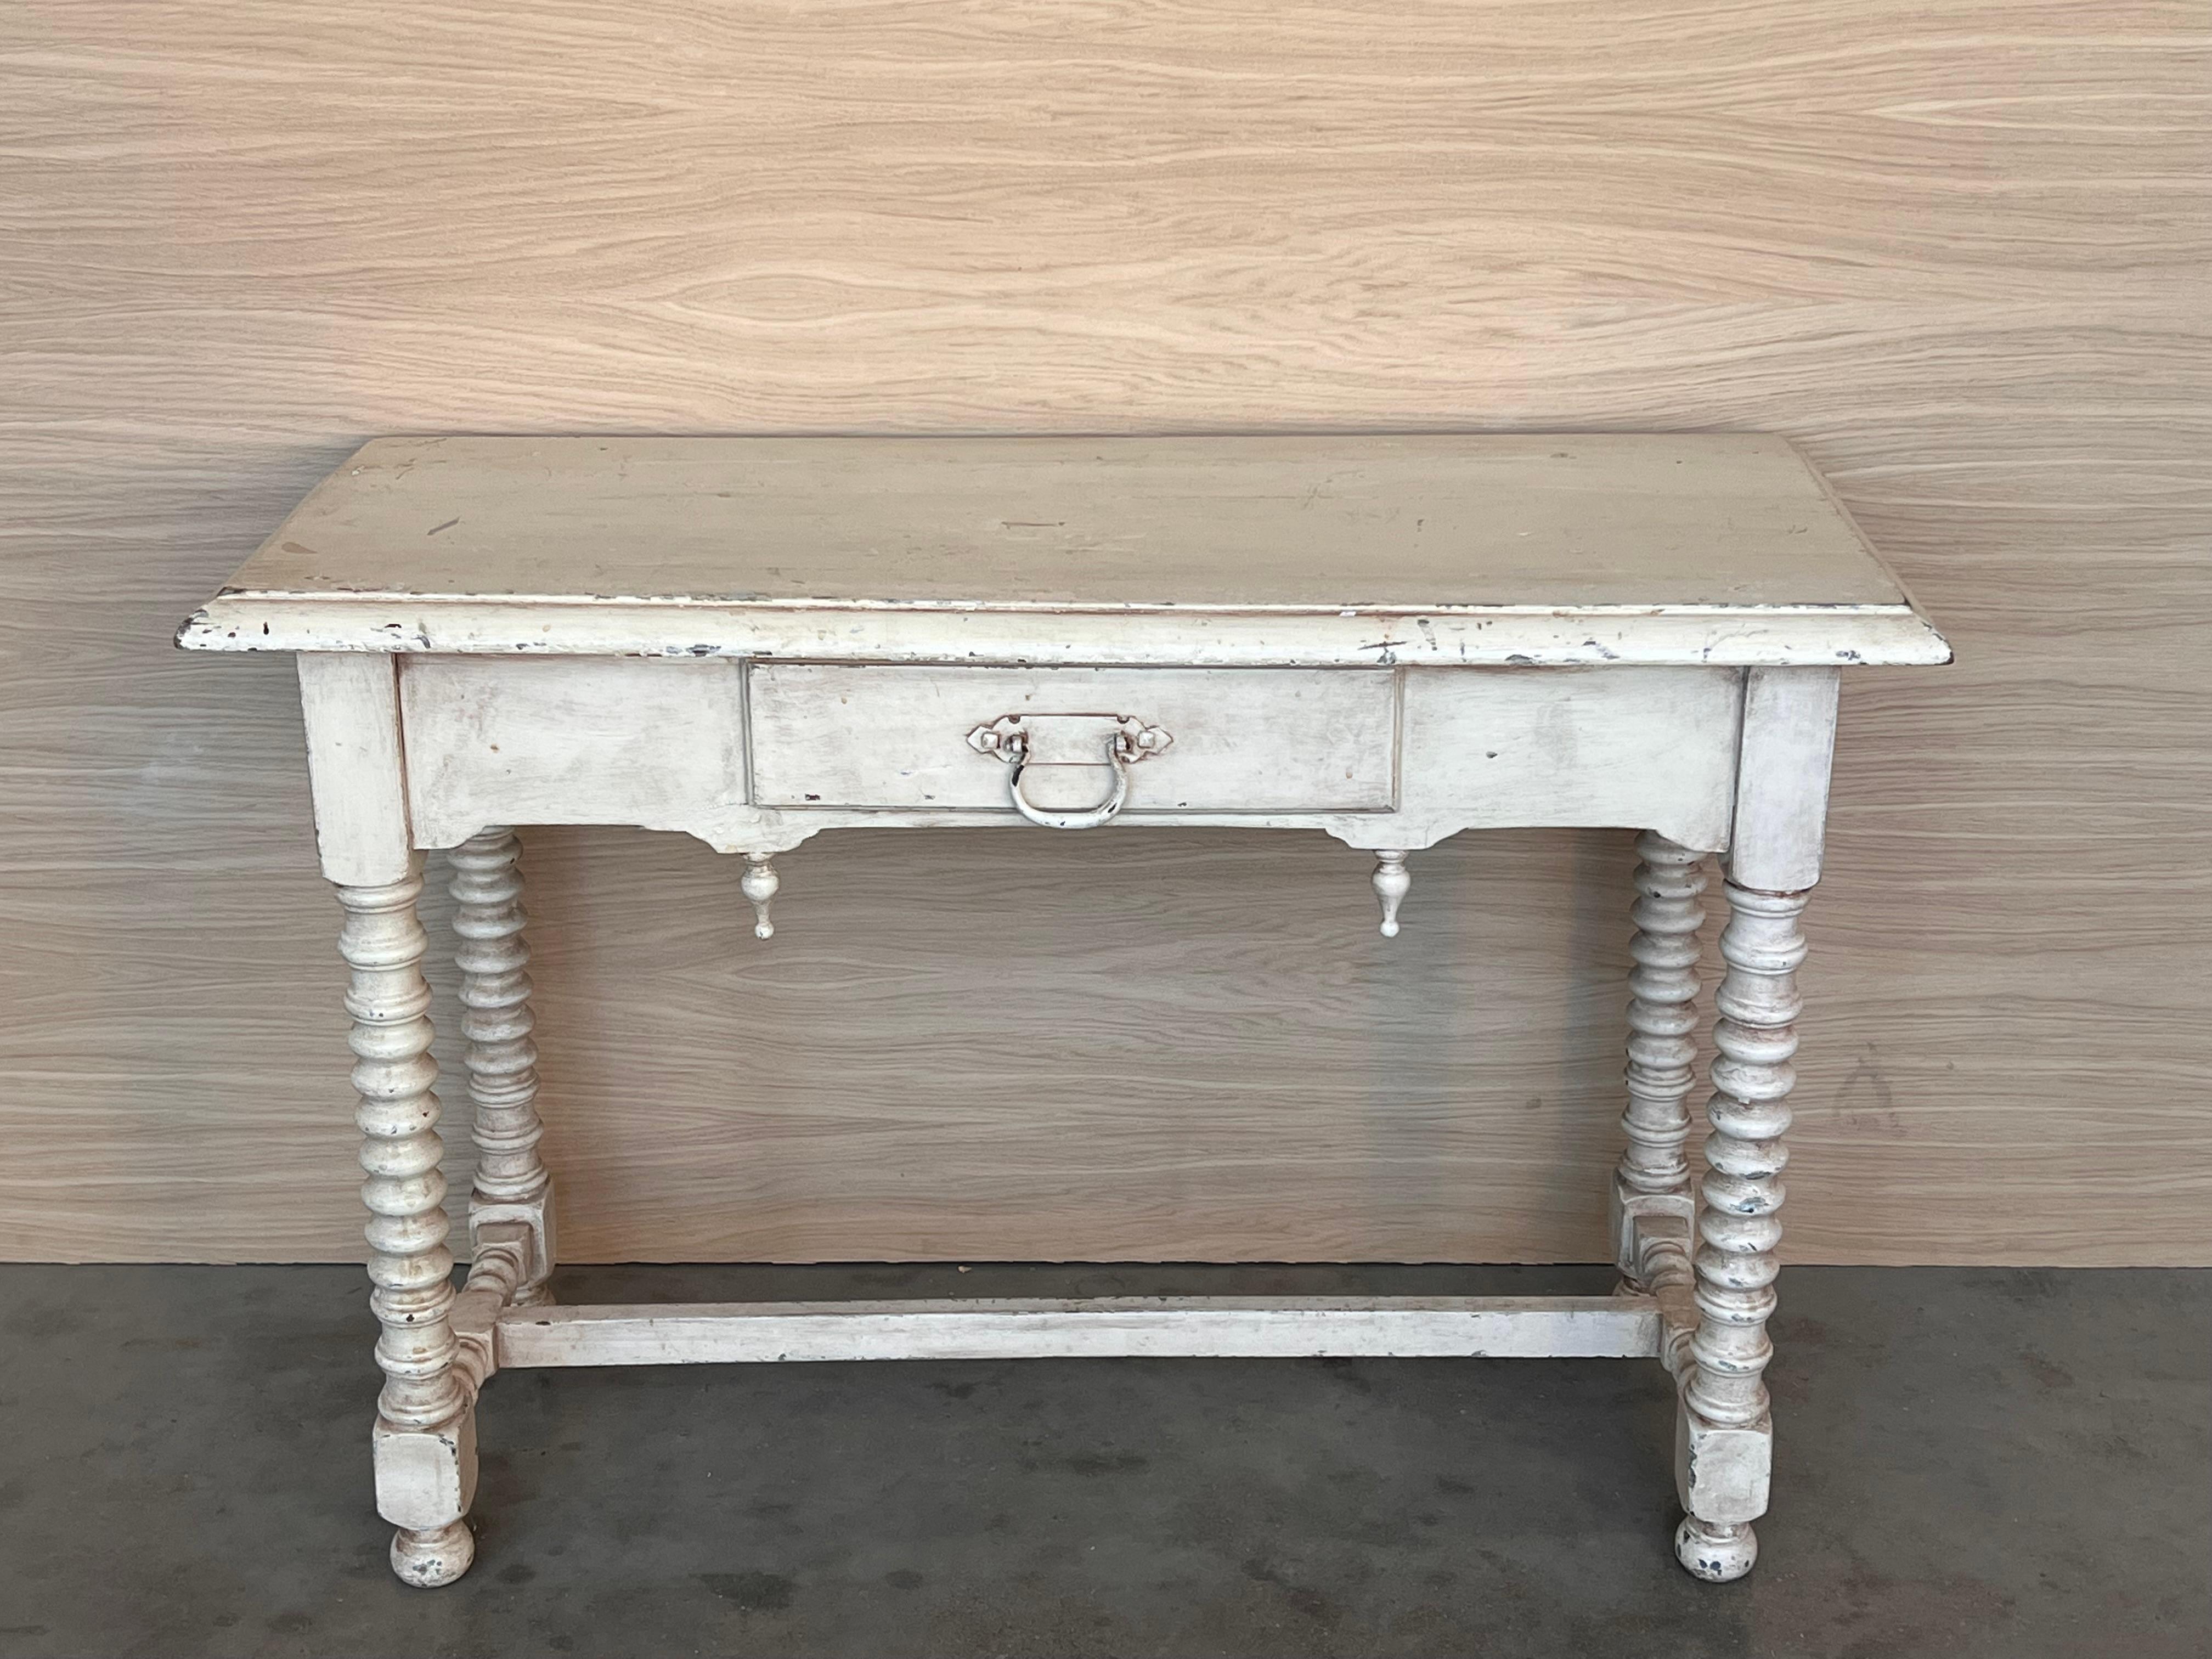 French Provincial Rustic Antique Farmhouse Harvest Spanish Table with drawer For Sale